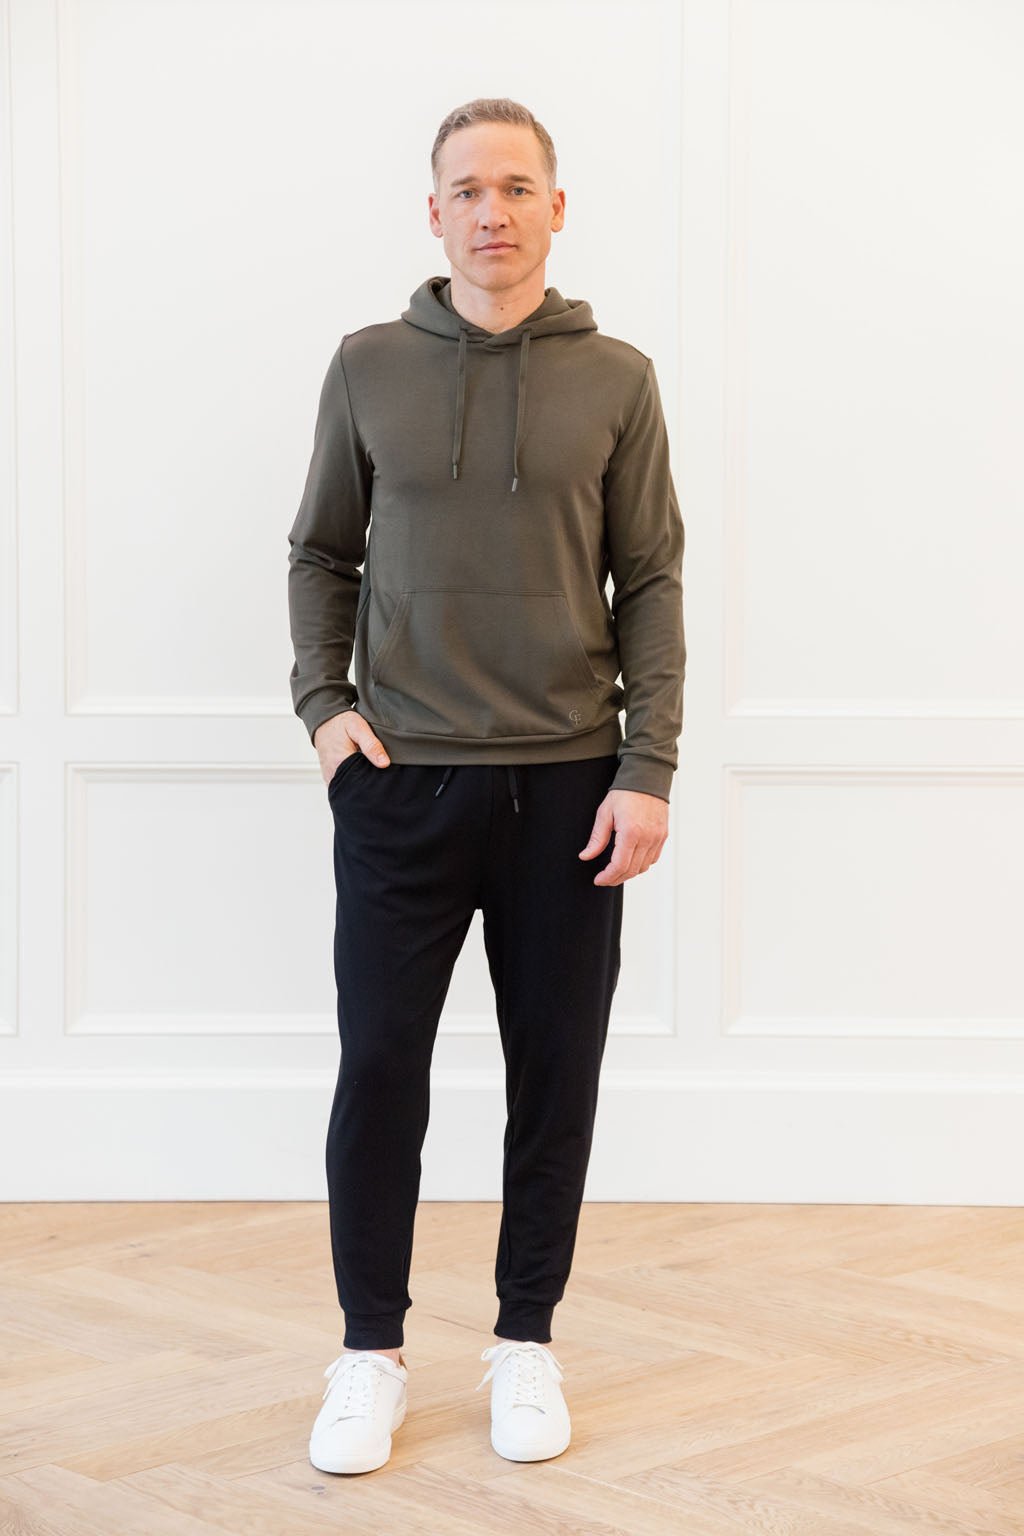 Hunter Bamboo Hoodie worn by man standing in front of white background.